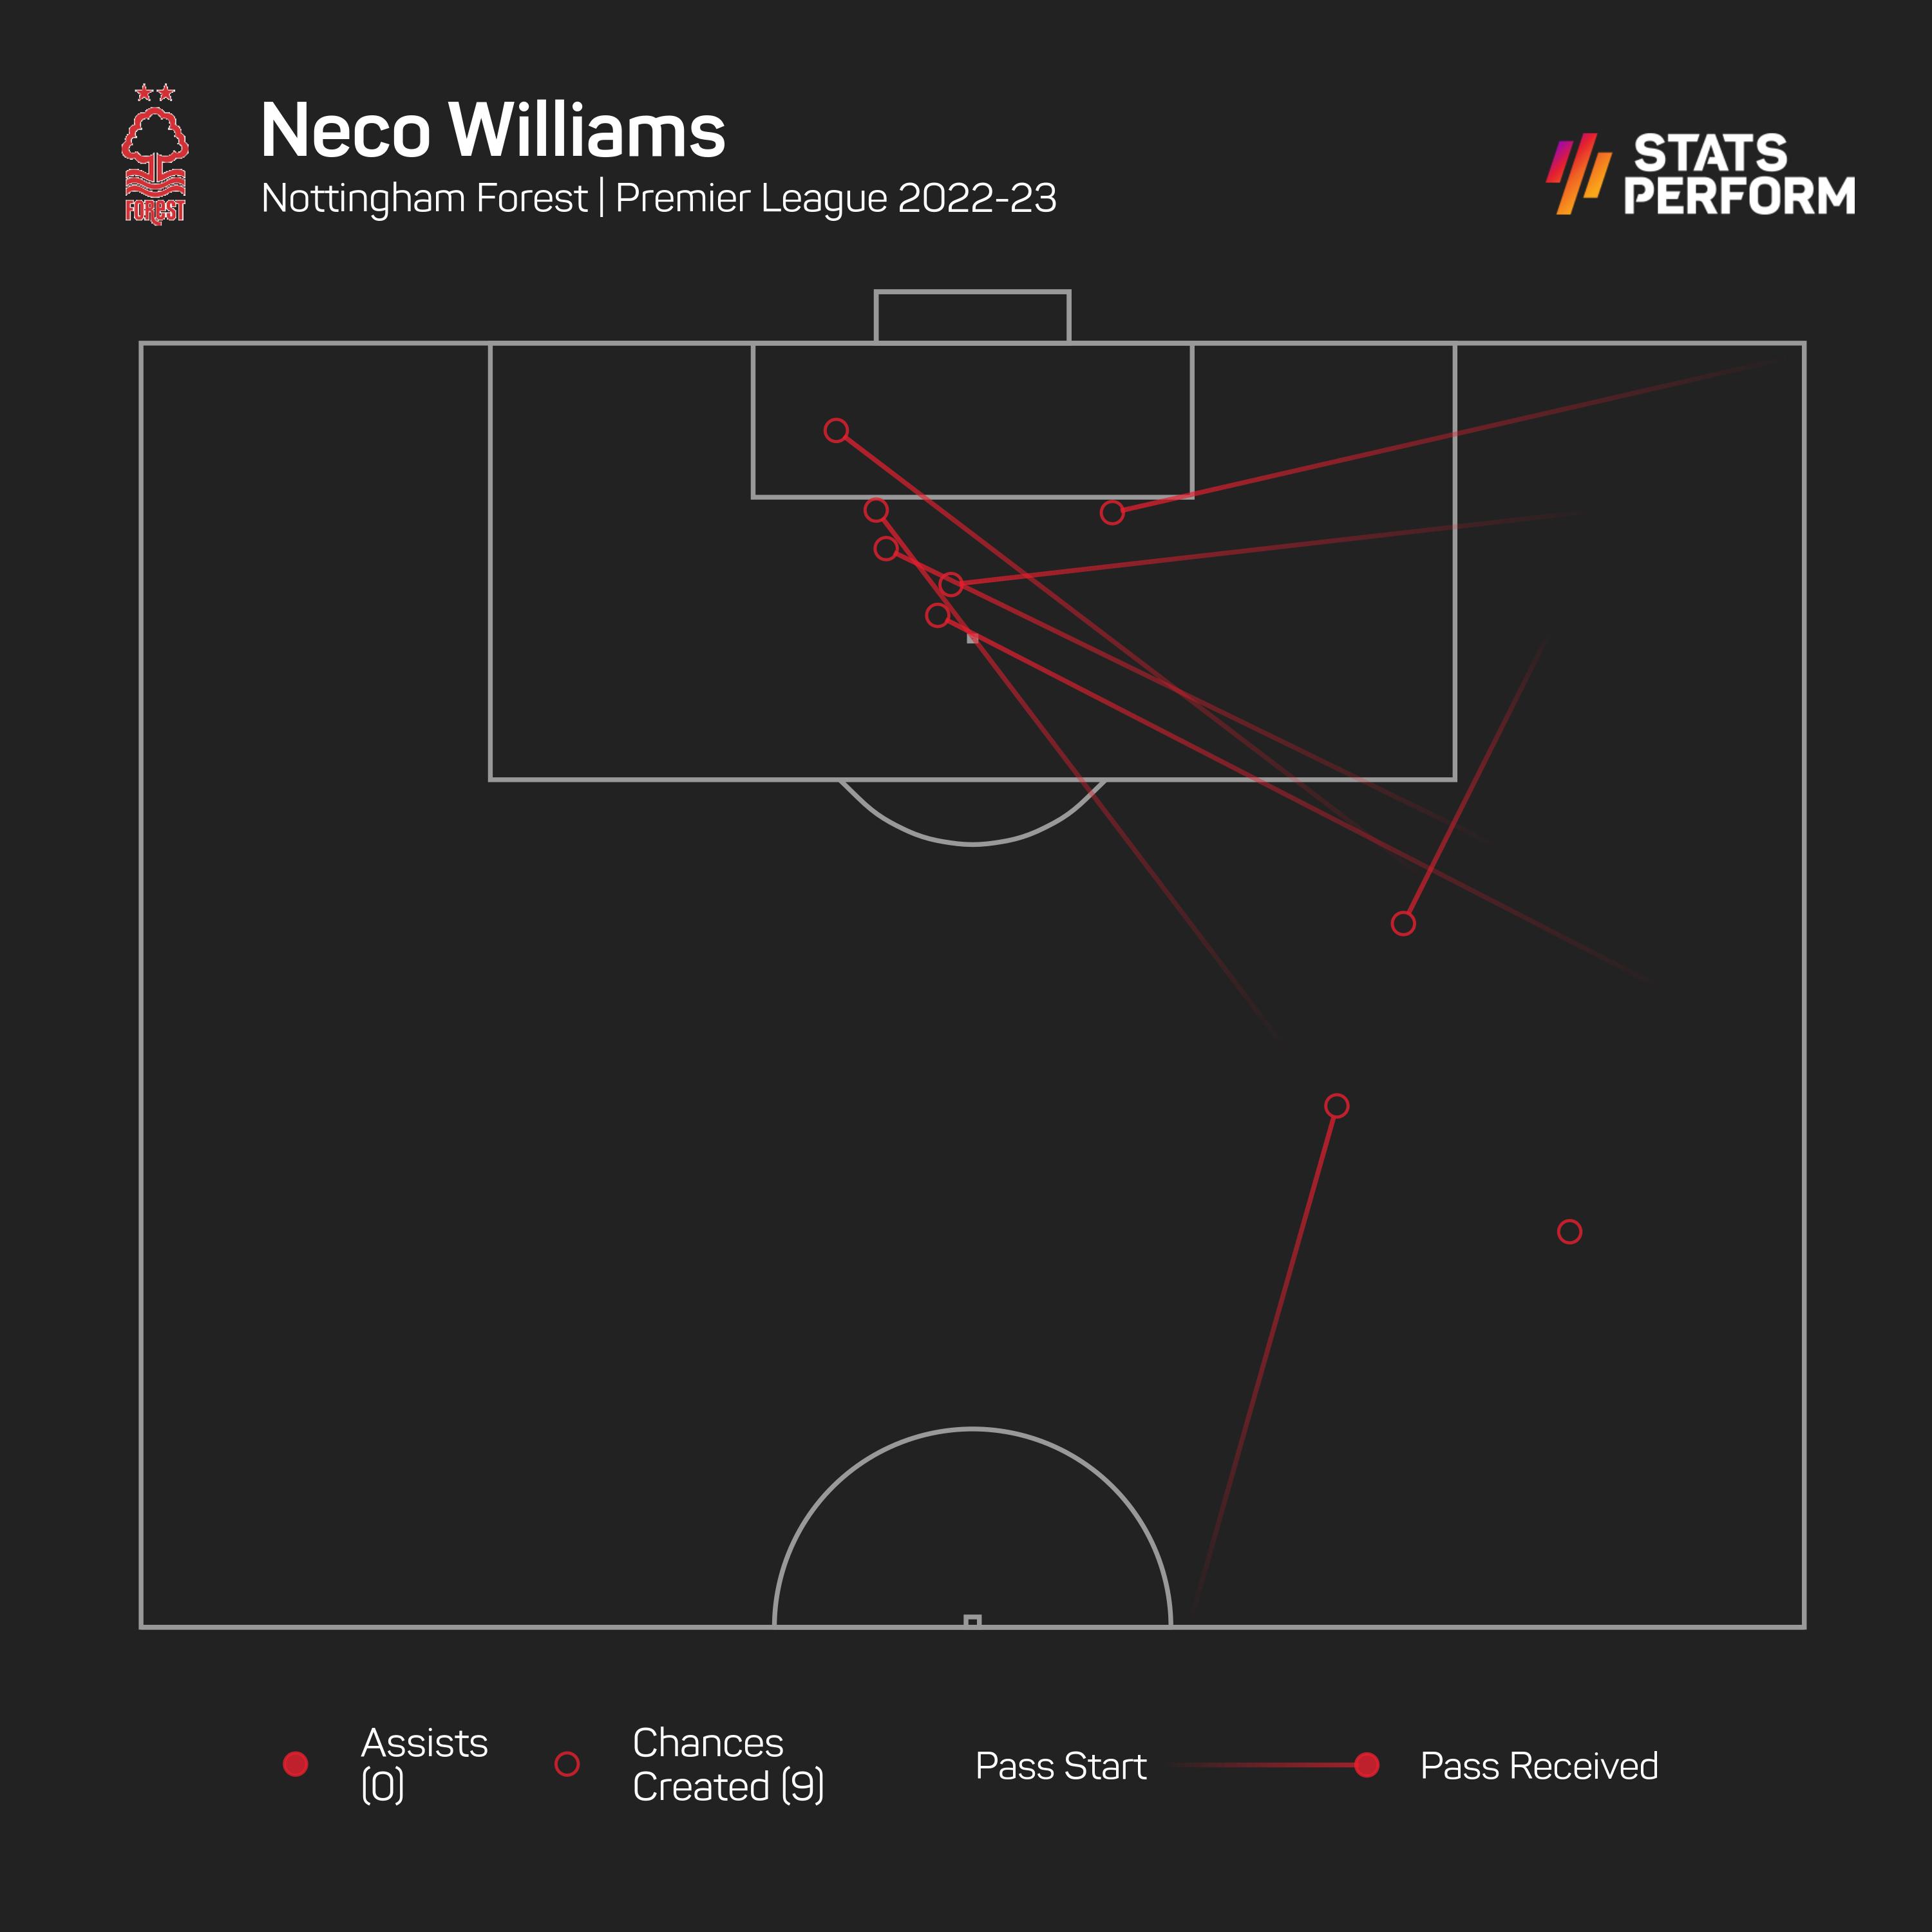 Neco Williams has been a creative outlet for Nottingham Forest